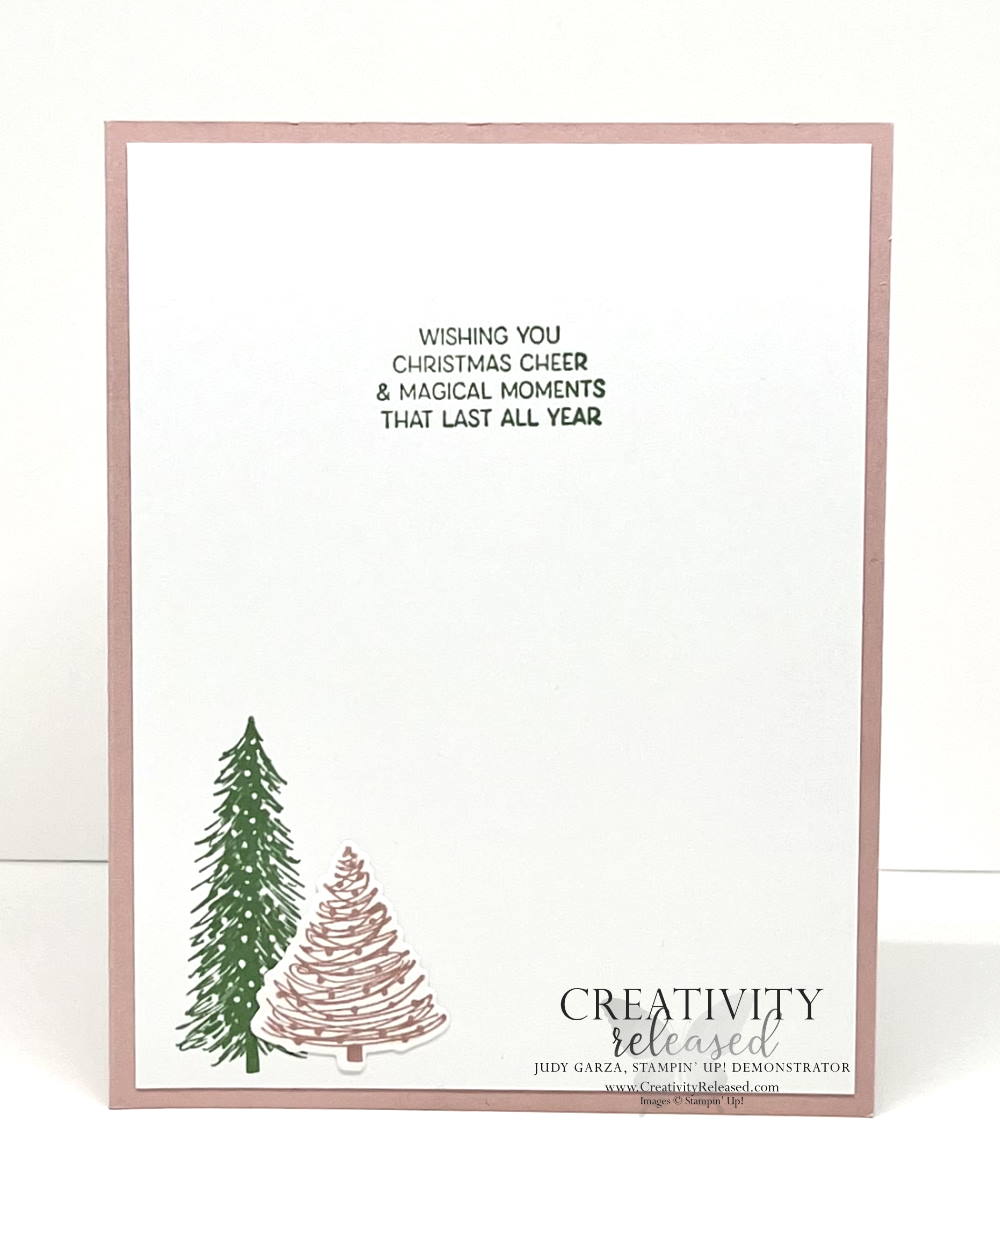 The inside of a Christmas card using the Whimsy & Wonder Suite in the 2021 July-December Mini Catalog by Stampin' Up!